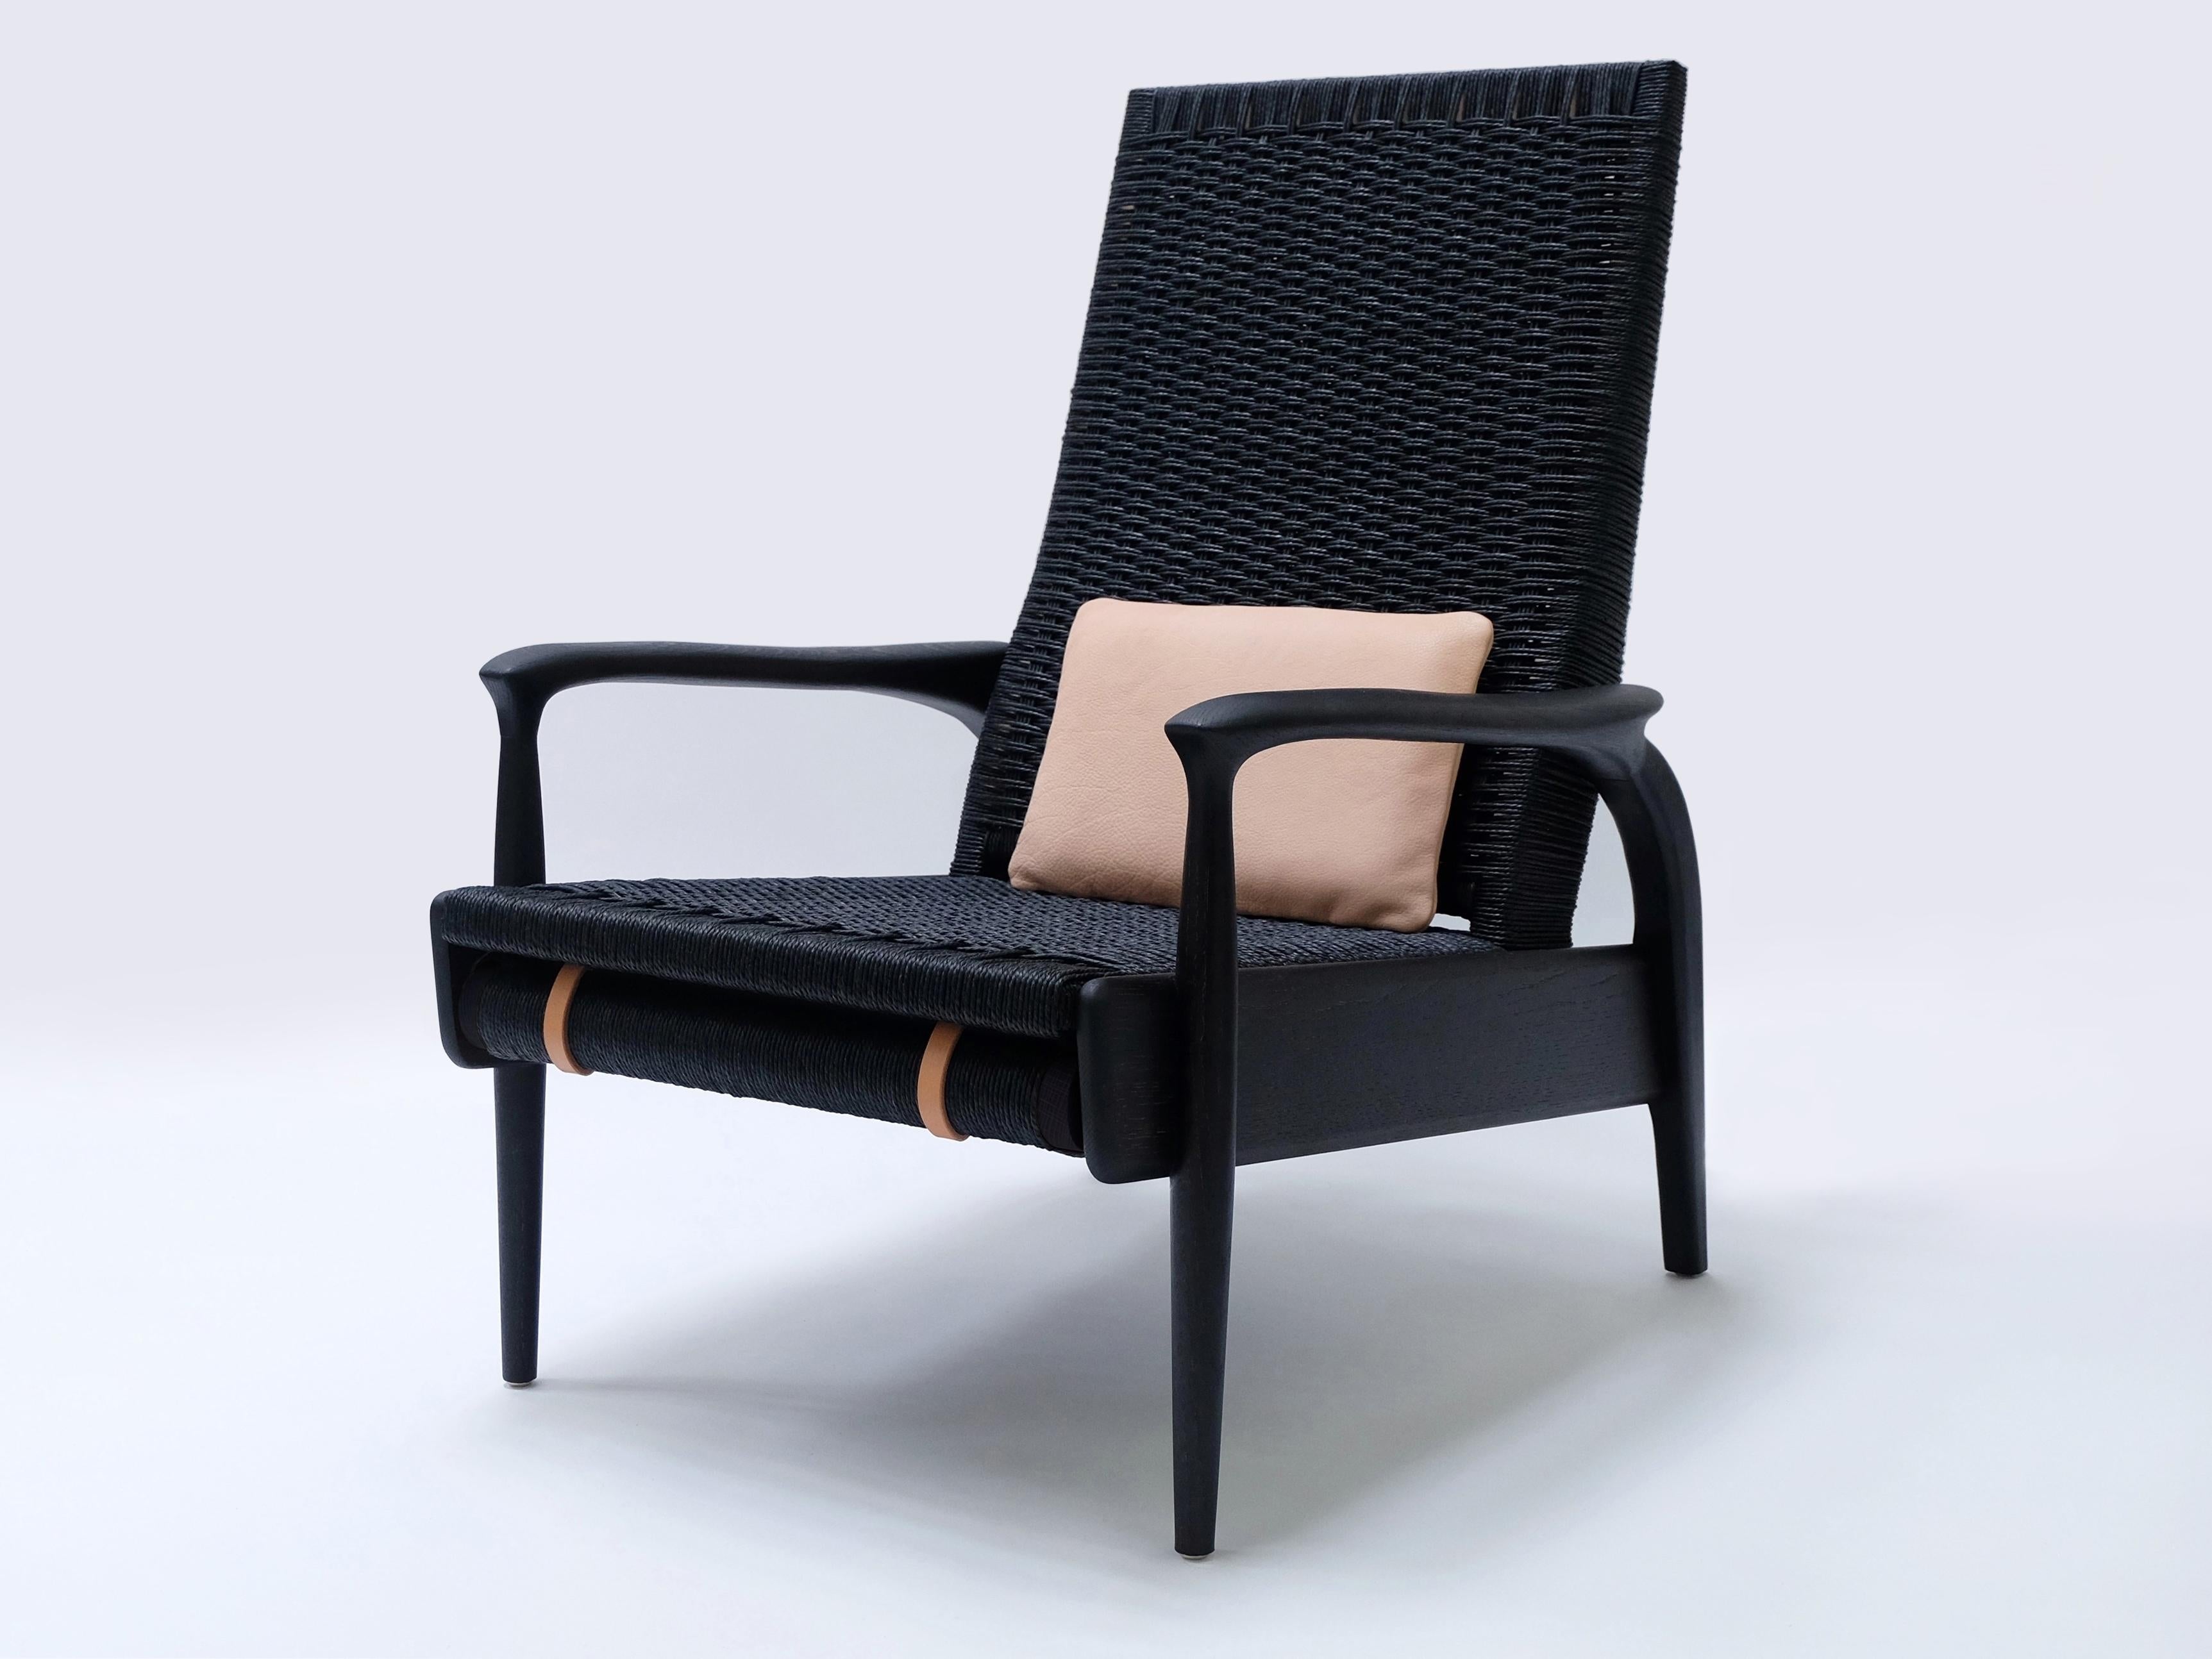 Custom-Made Handcrafted Reclining Eco Lounge Chairs FENDRIK by Studio180degree
Shown in Sustainable Solid Natural Blackened Oak and Black Original Danish Cord

Noble - Tactile – Refined - Sustainable
Reclining Eco Lounge Chair FENDRIK is a noble Eco